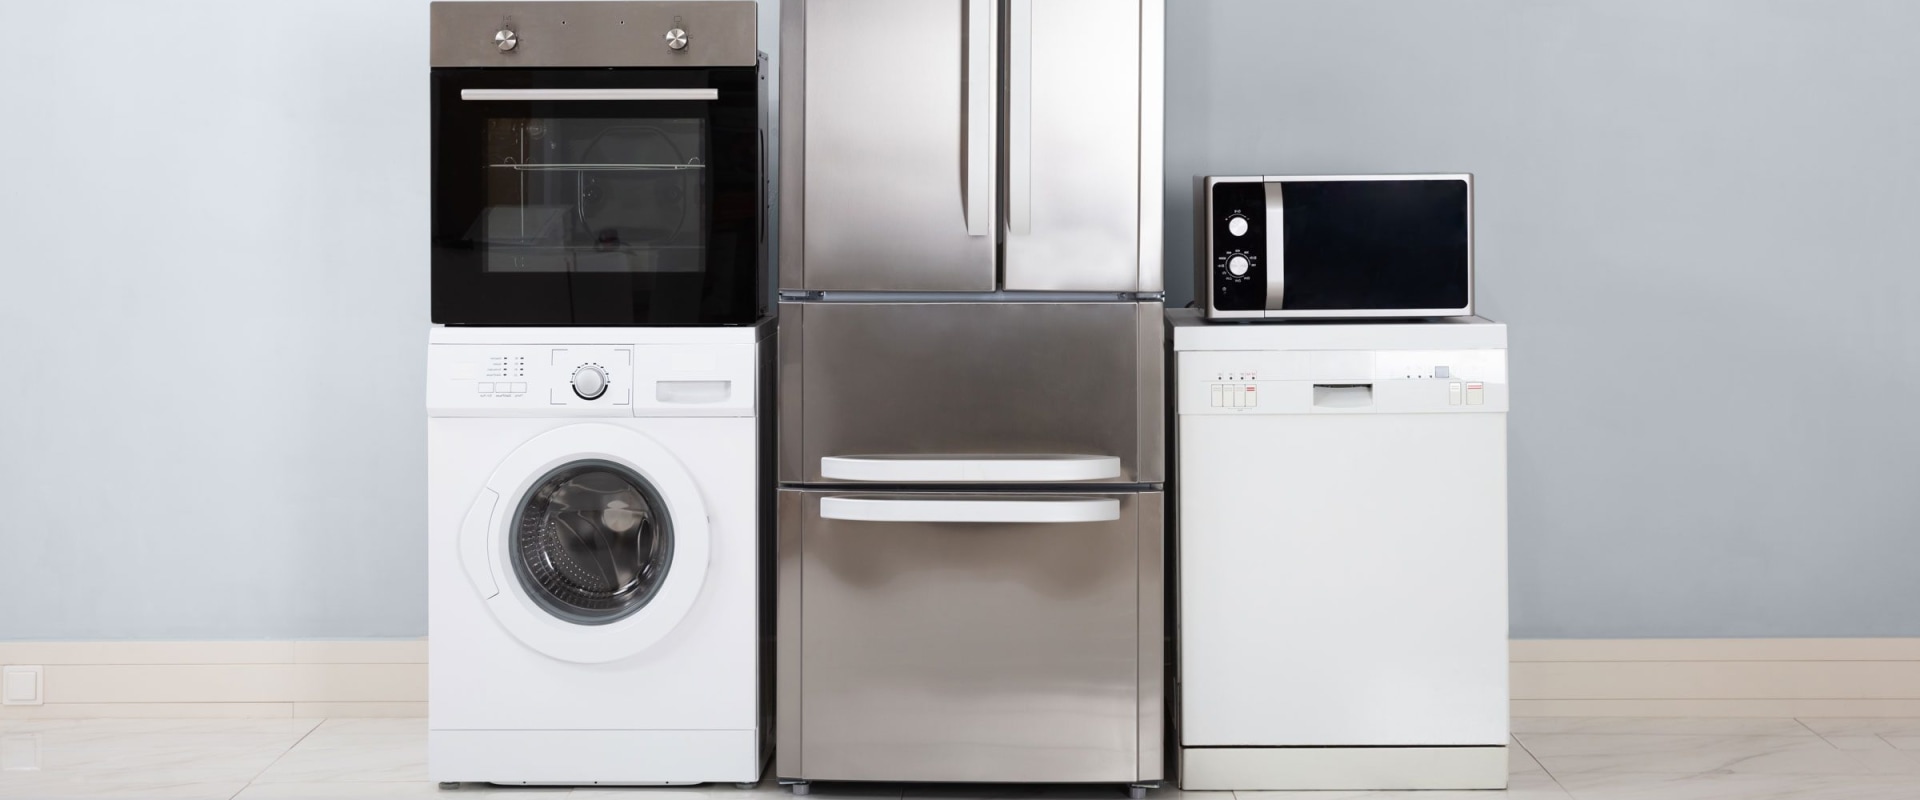 Which brand is no 1 home appliances?